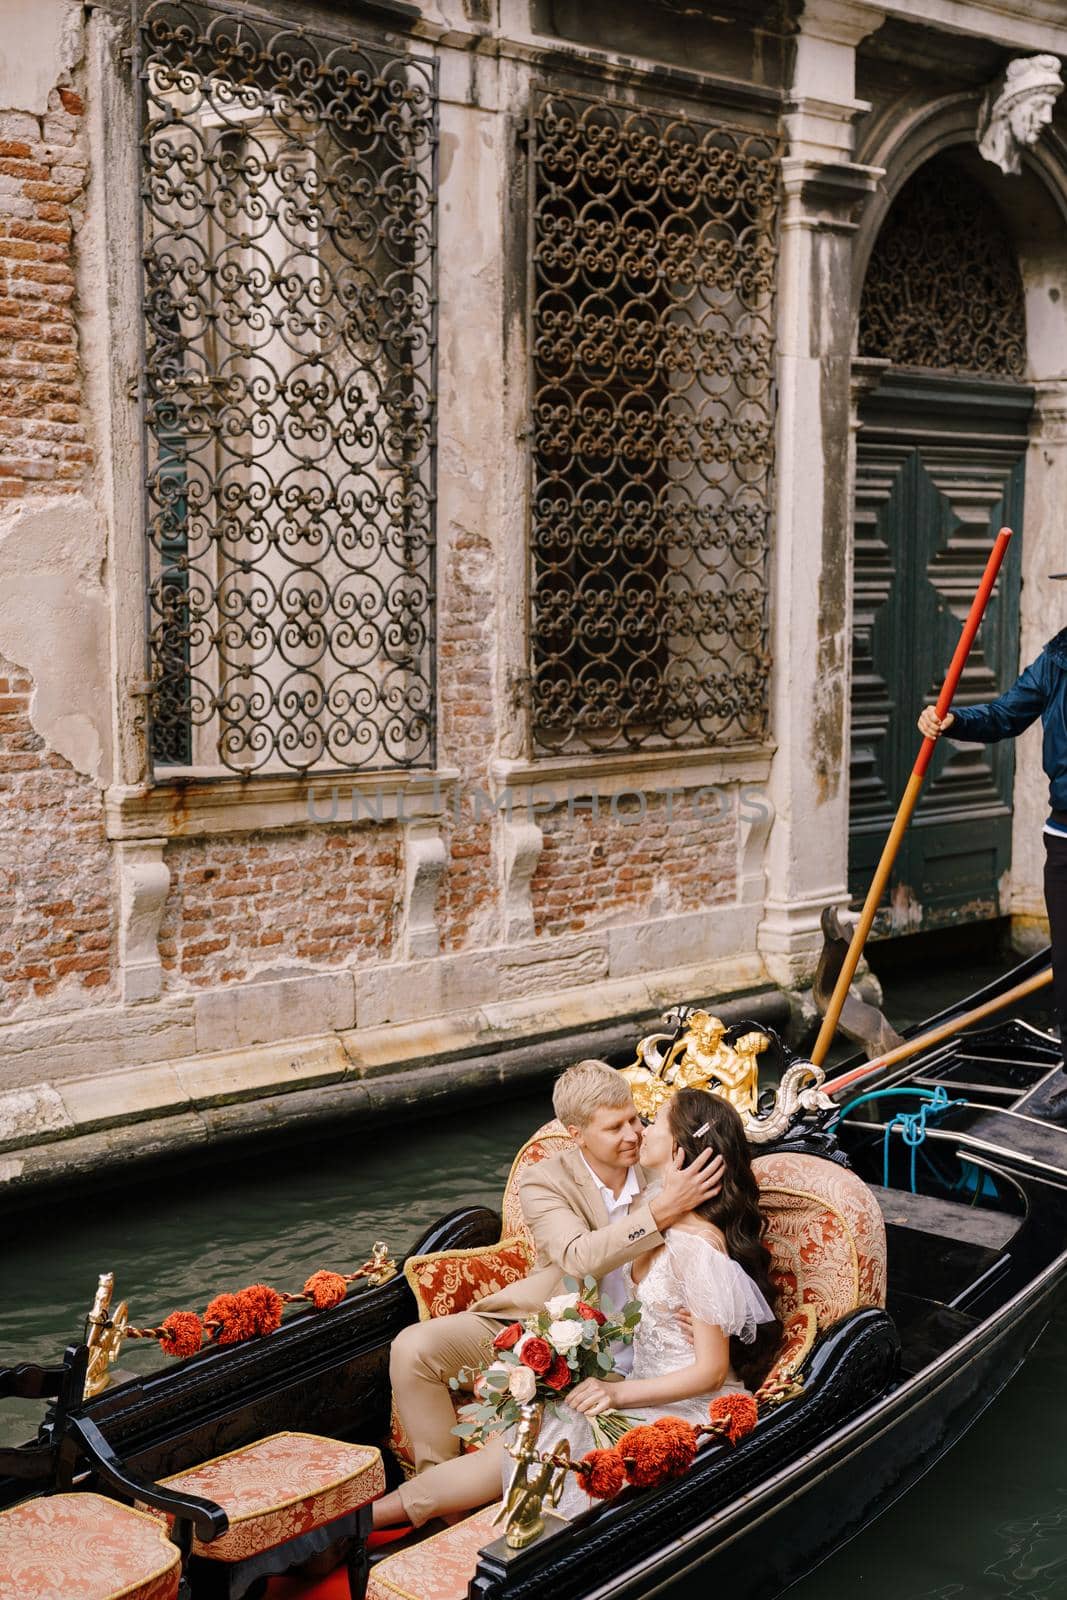 The gondolier rides the bride and groom in a classic wooden gondola along a narrow Venetian canal. Newlyweds sit in a boat spout to the spout, swim against the background of an old forged lattice.